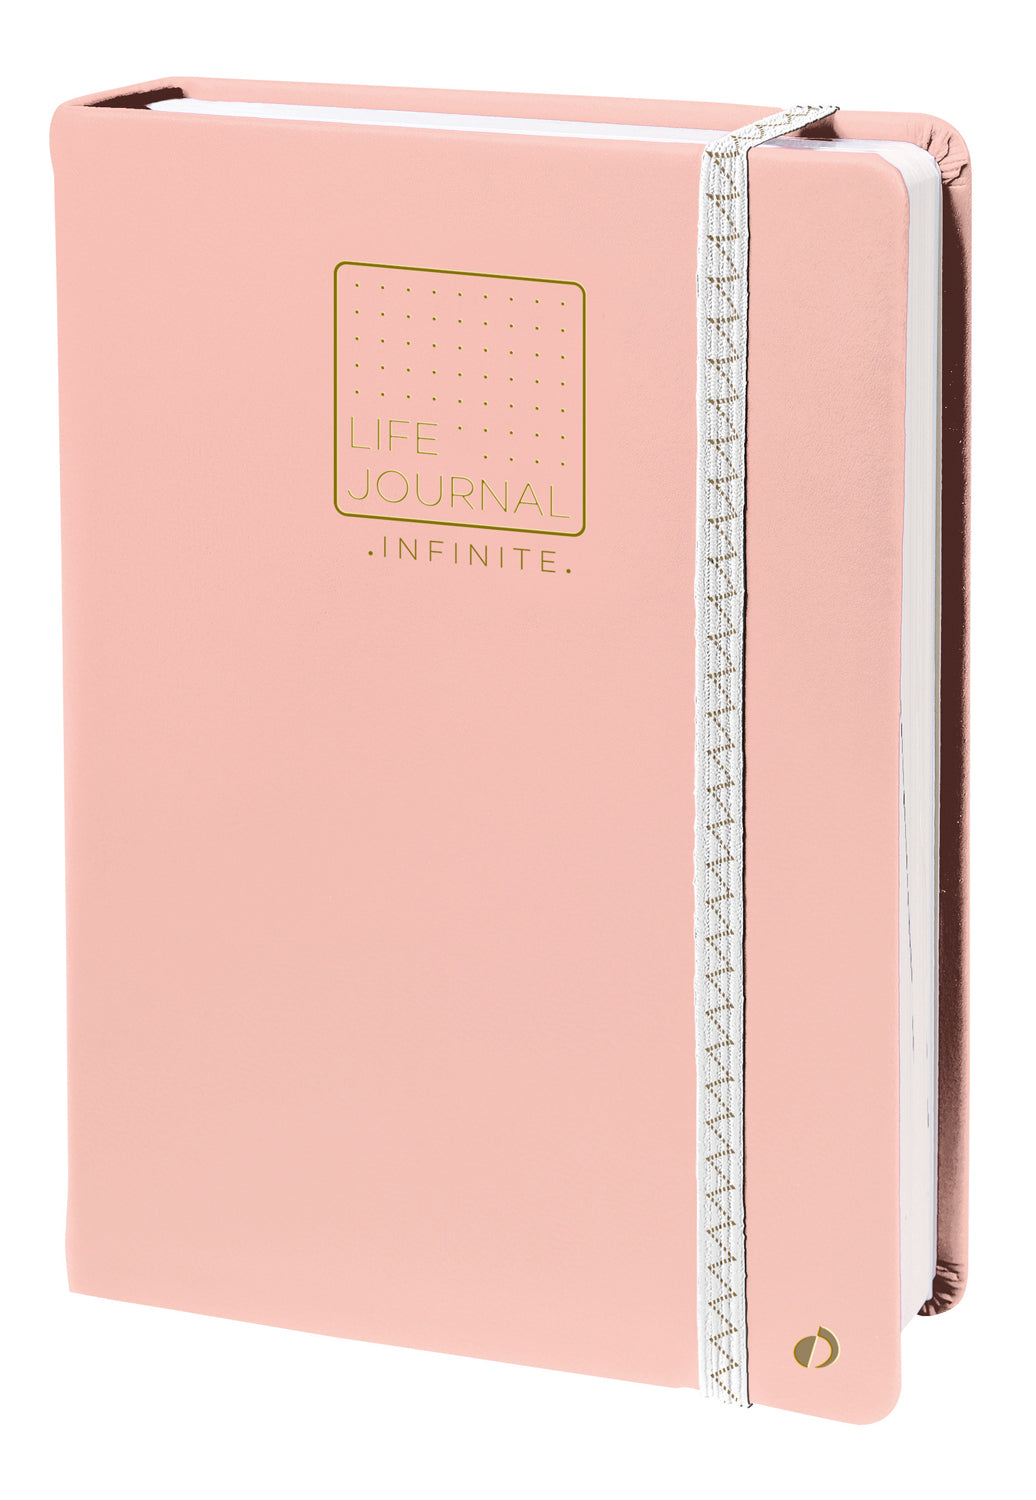 Quo Vadis Life Journal Infinite Pink Notebook - A5 - 210 mm x 150 mm